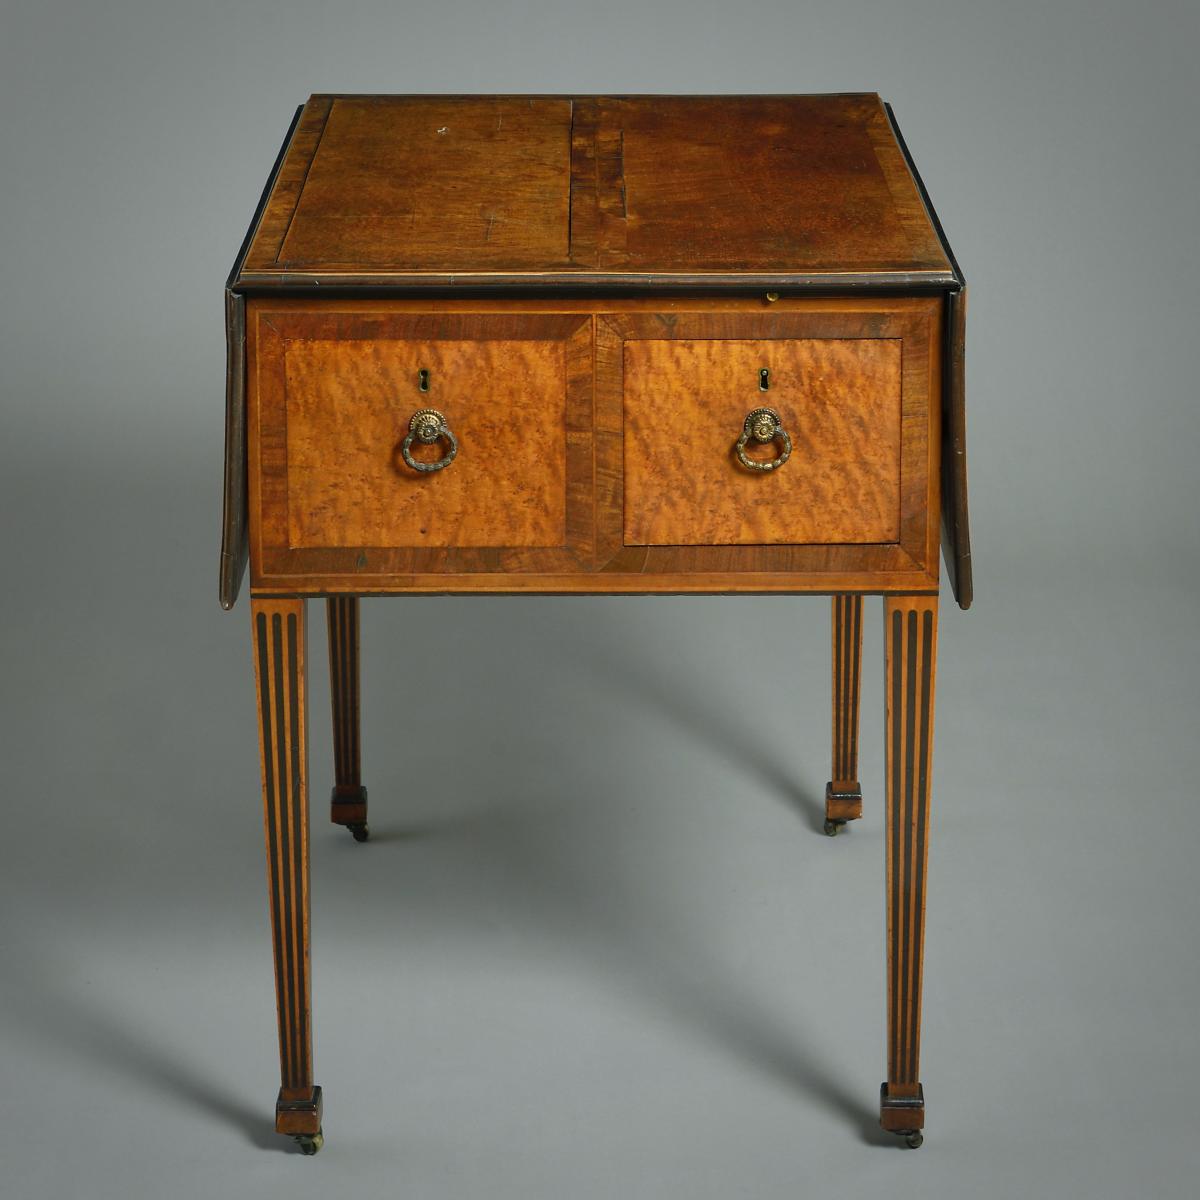 George III Burr-Maple, Fustic, Ebony and Holly Harlequin Pembroke Table By Mayhew And Ince